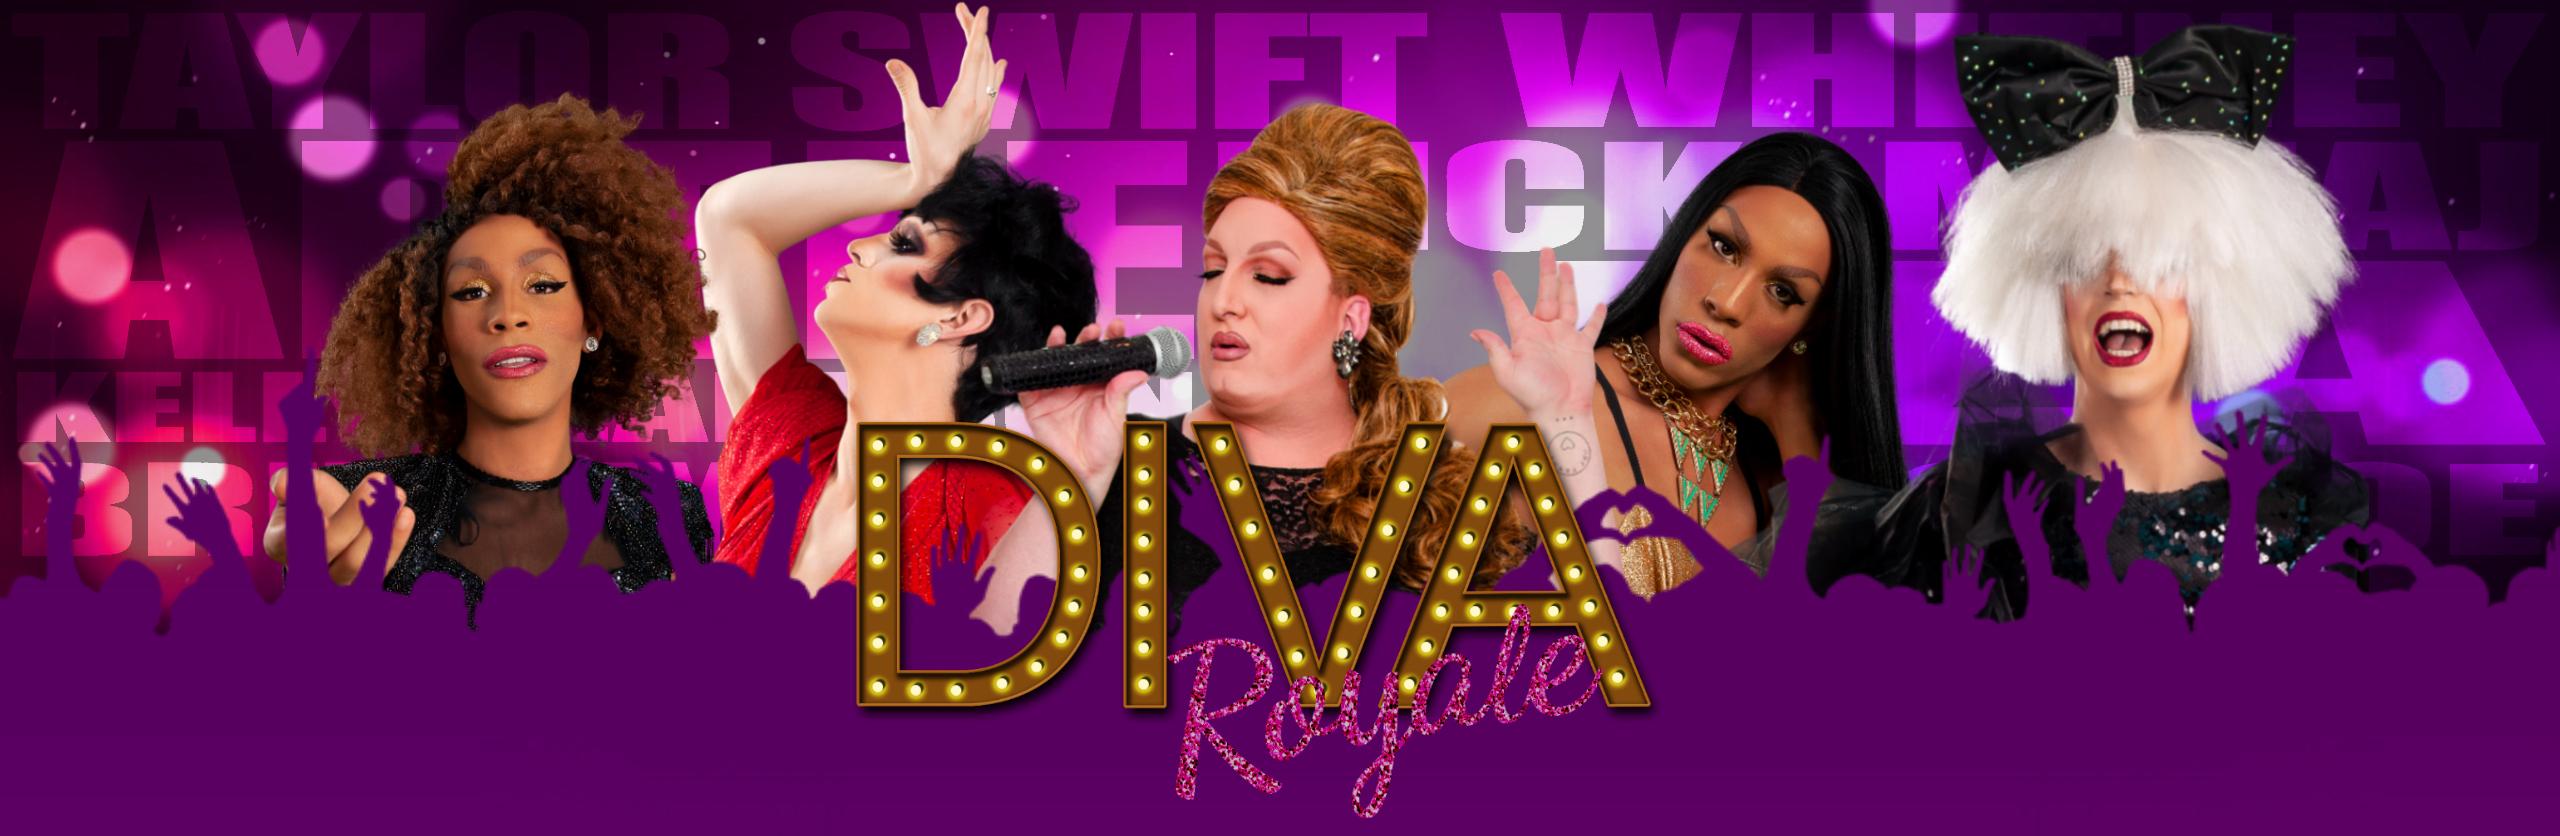  Diva Royale Drag Queen Show San Diego, CA - Weekly Drag Queen Shows in San Diego - Perfect for Bachelorette & Bachelor Parties